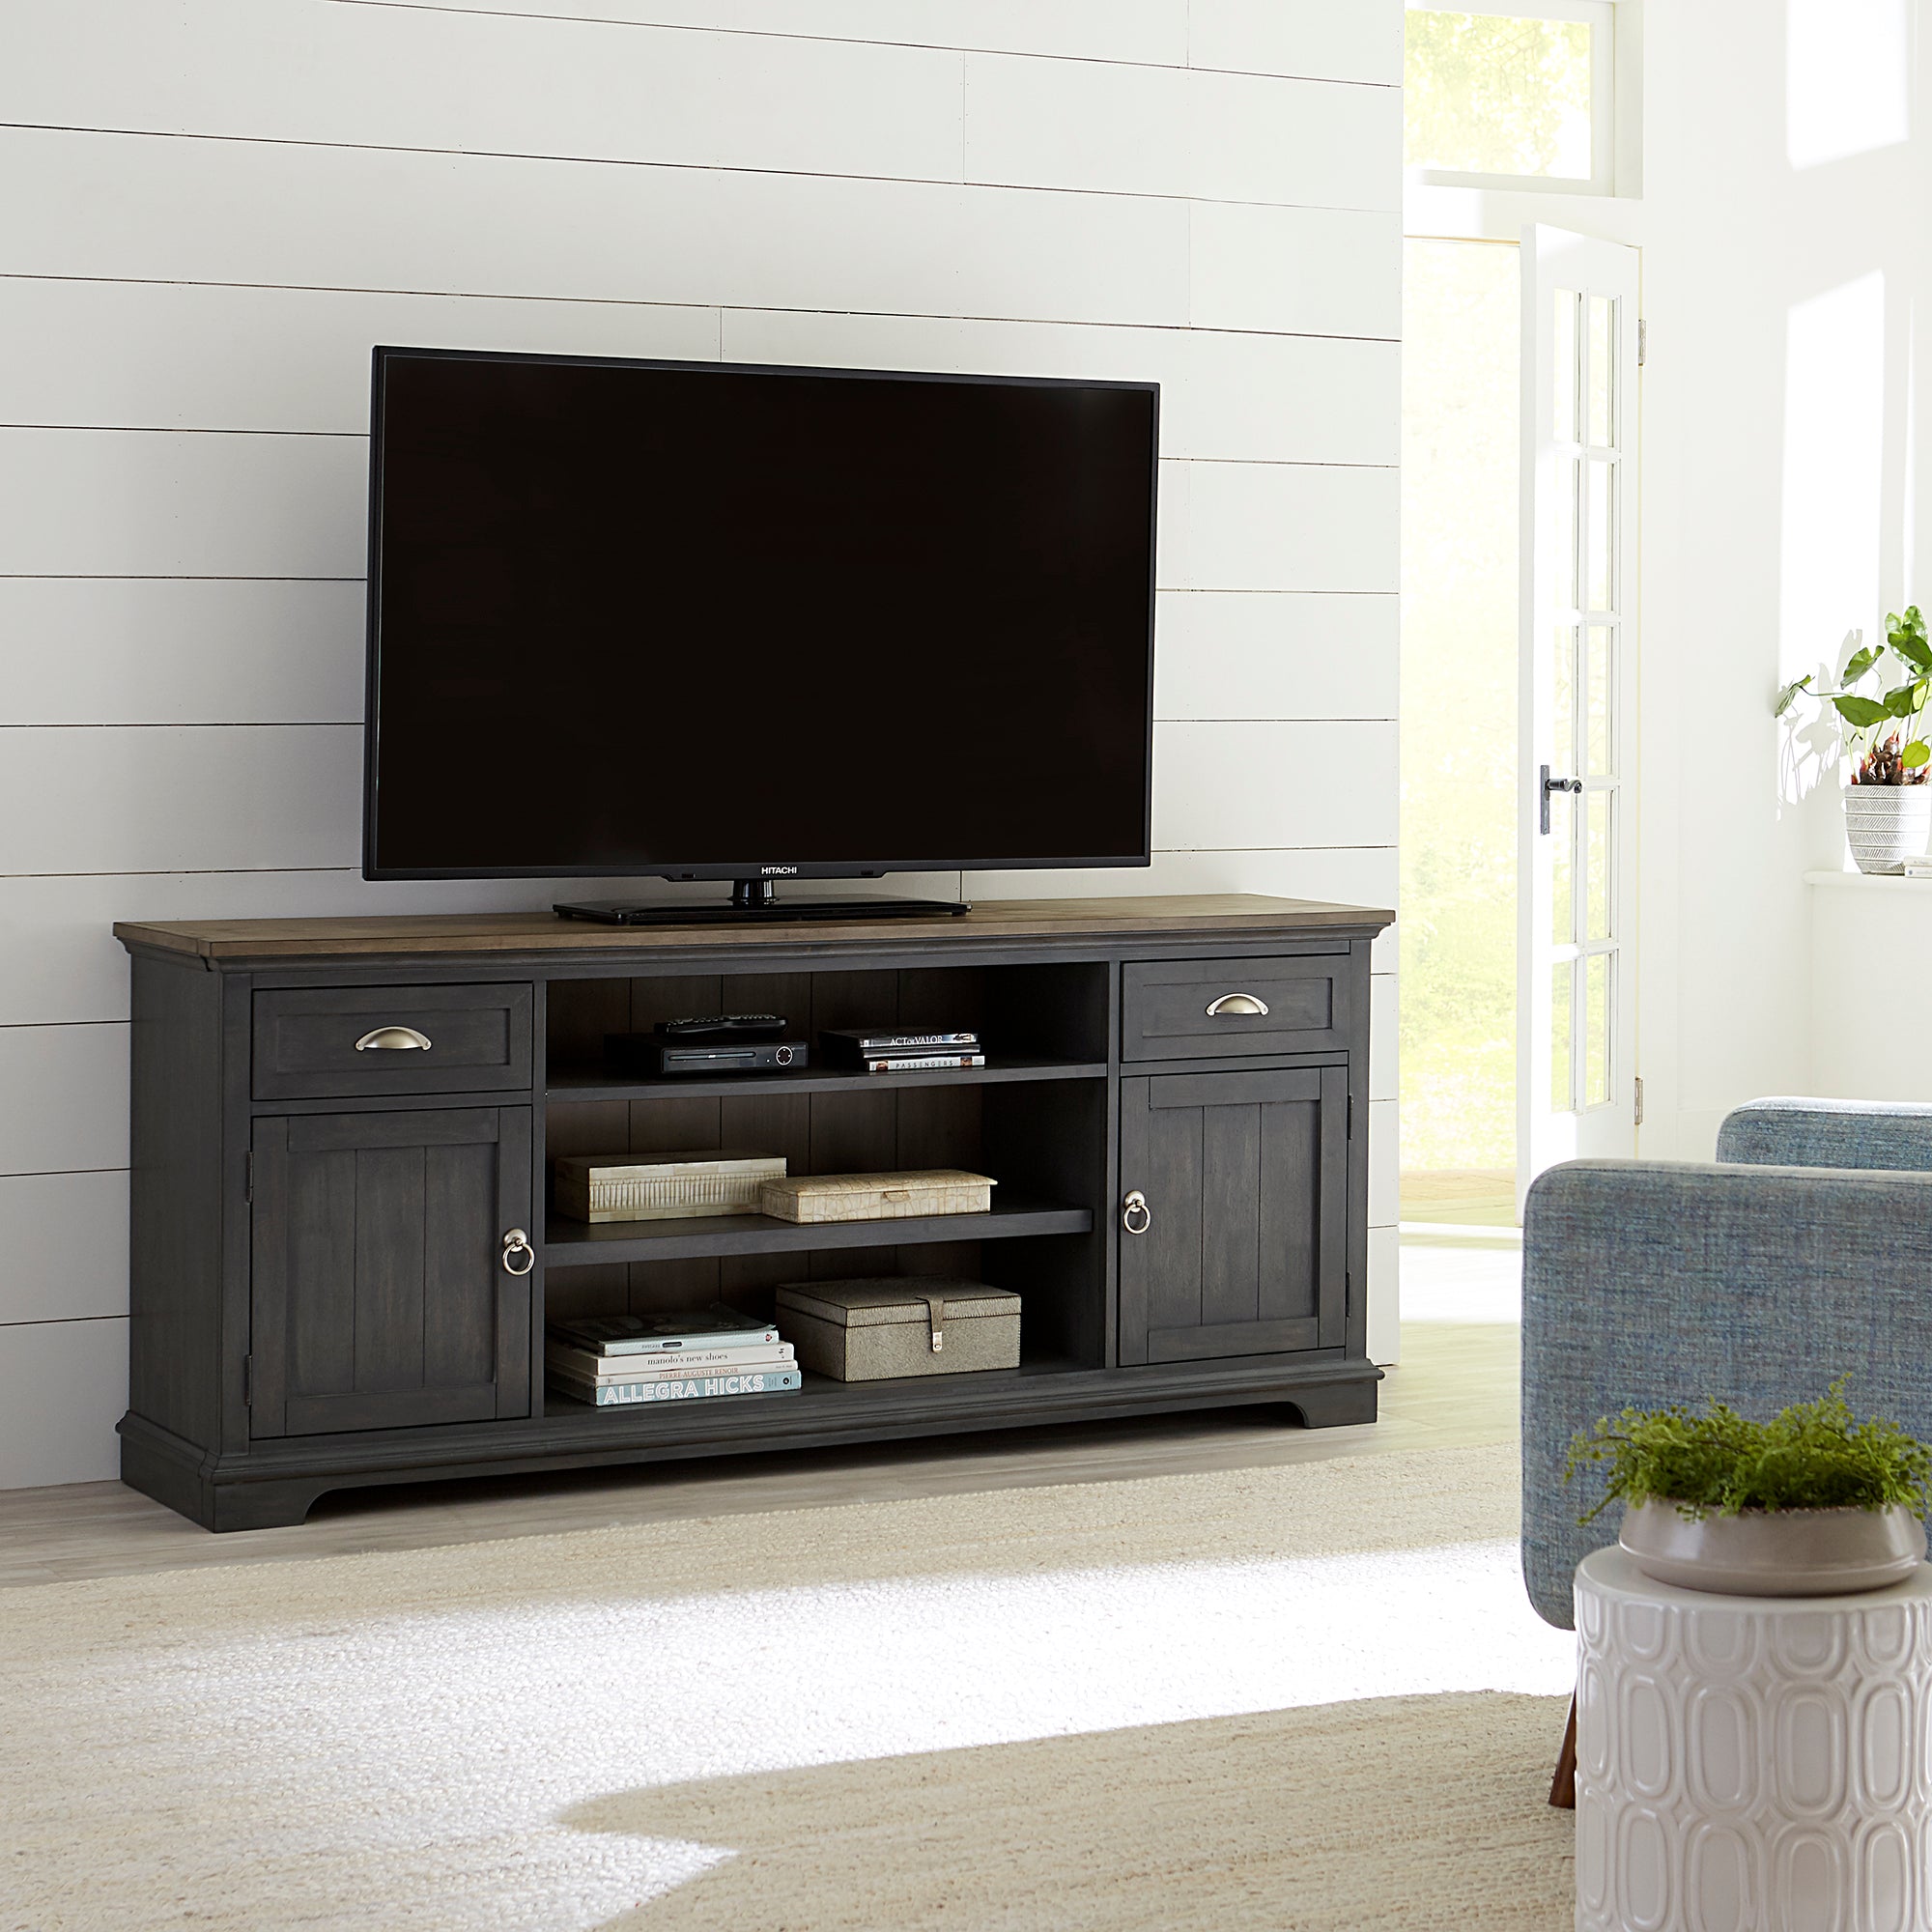 Liberty Furniture 303G-TV72 72 Inch Entertainment TV Stand